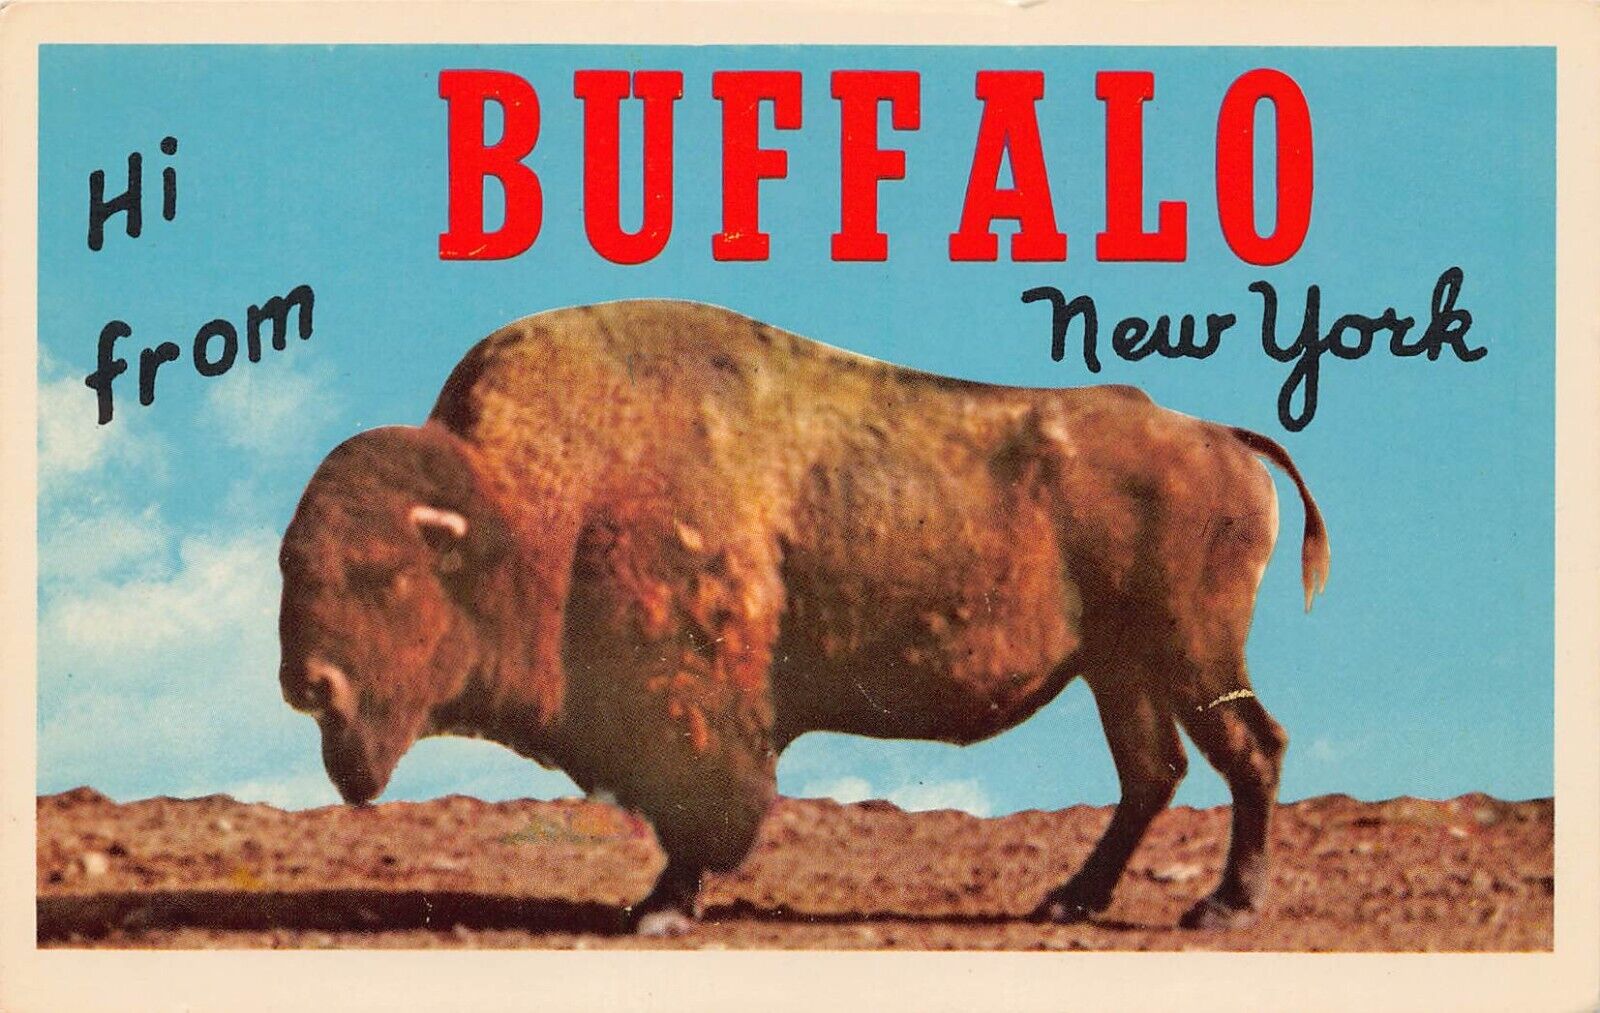 Buffalo New York NY Greetings Hi From Larger Not Large Letter Chrome 3DK-1298 PC